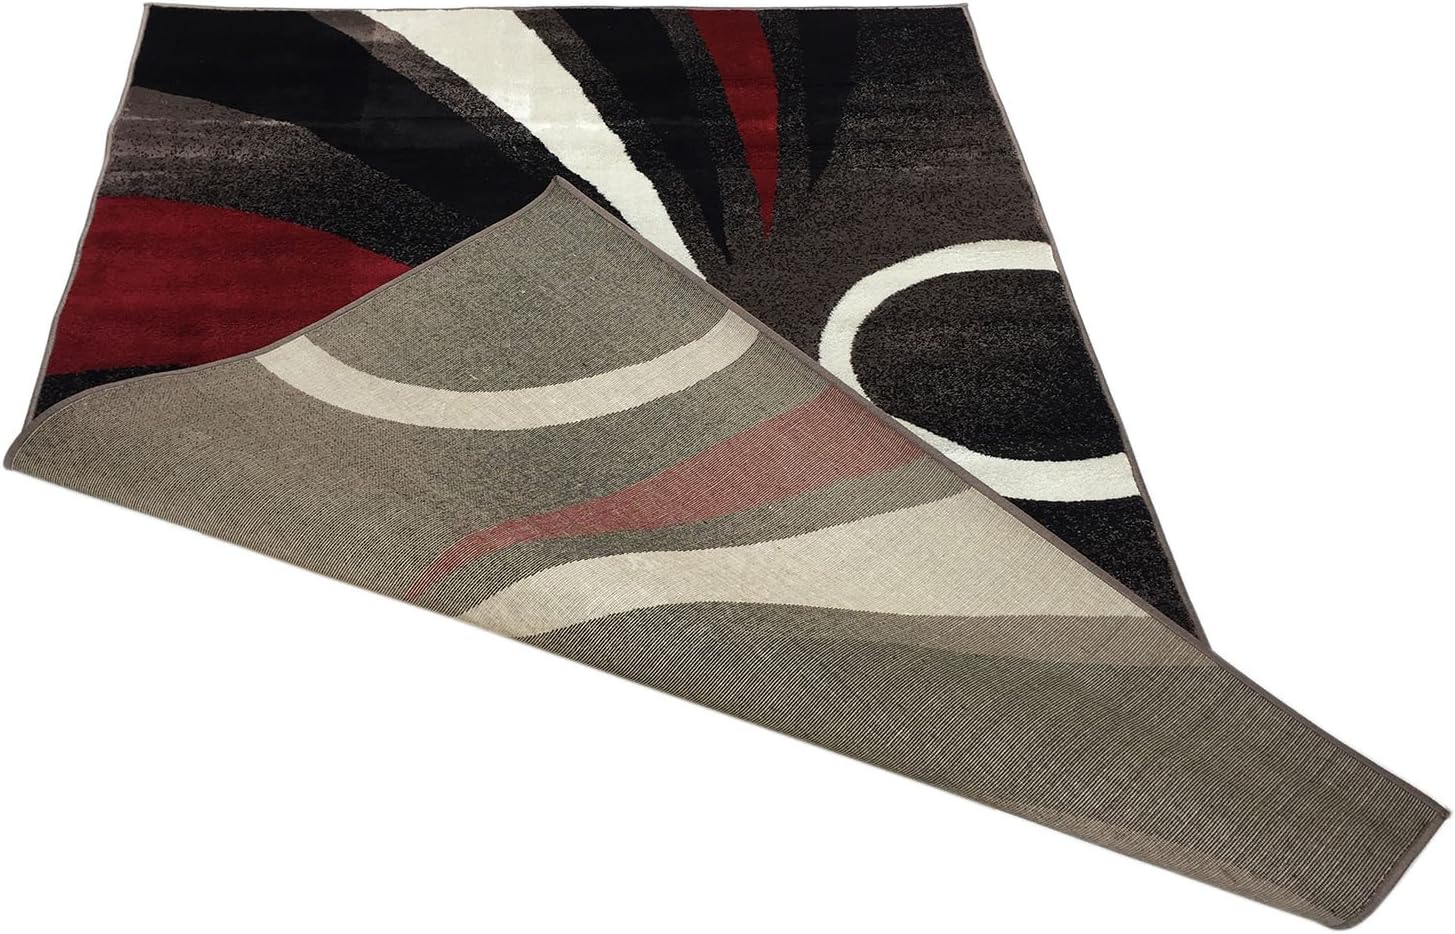 Comfy Collection New Stripes Design Area Rug Modern Contemporary Rug 3 Color Options (Cappuccino, 4'11" X 6'11")